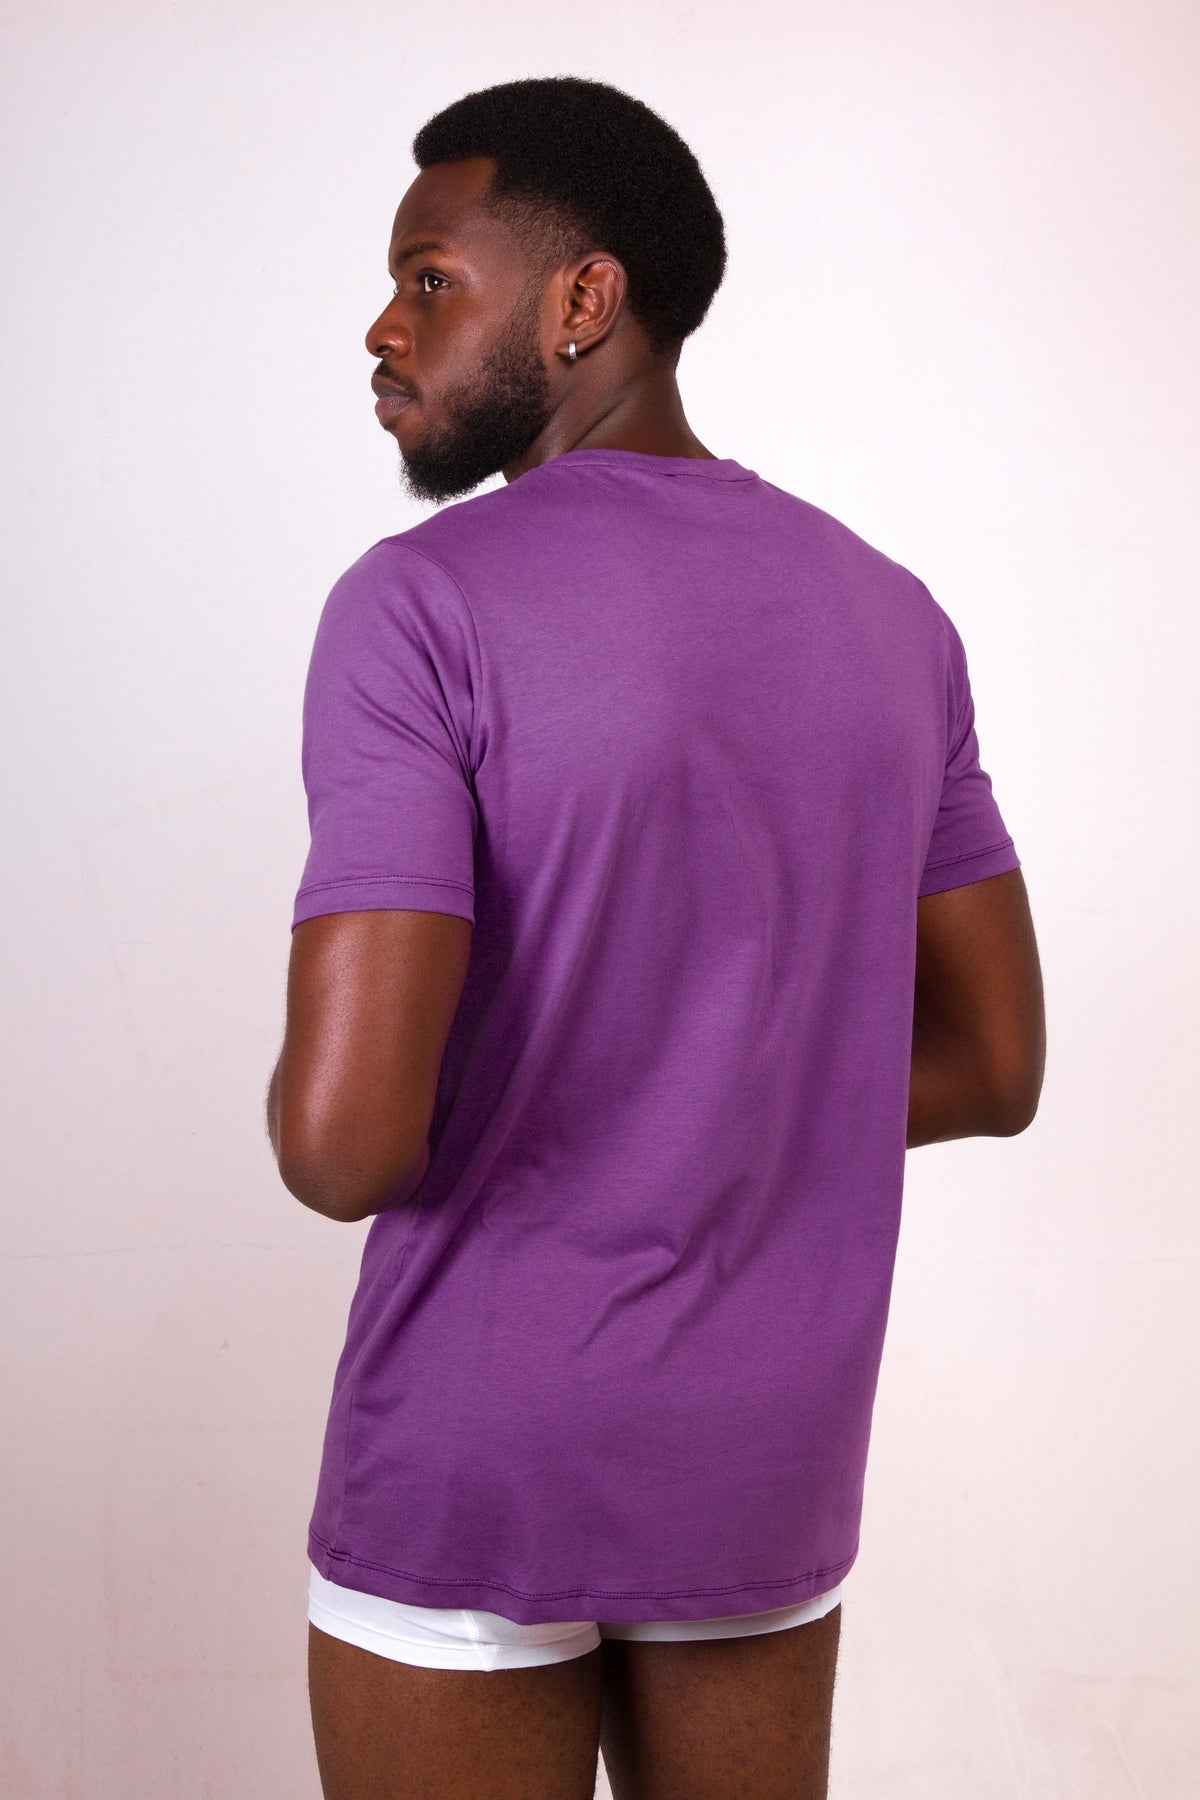 a man in a purple shirt and white underwear